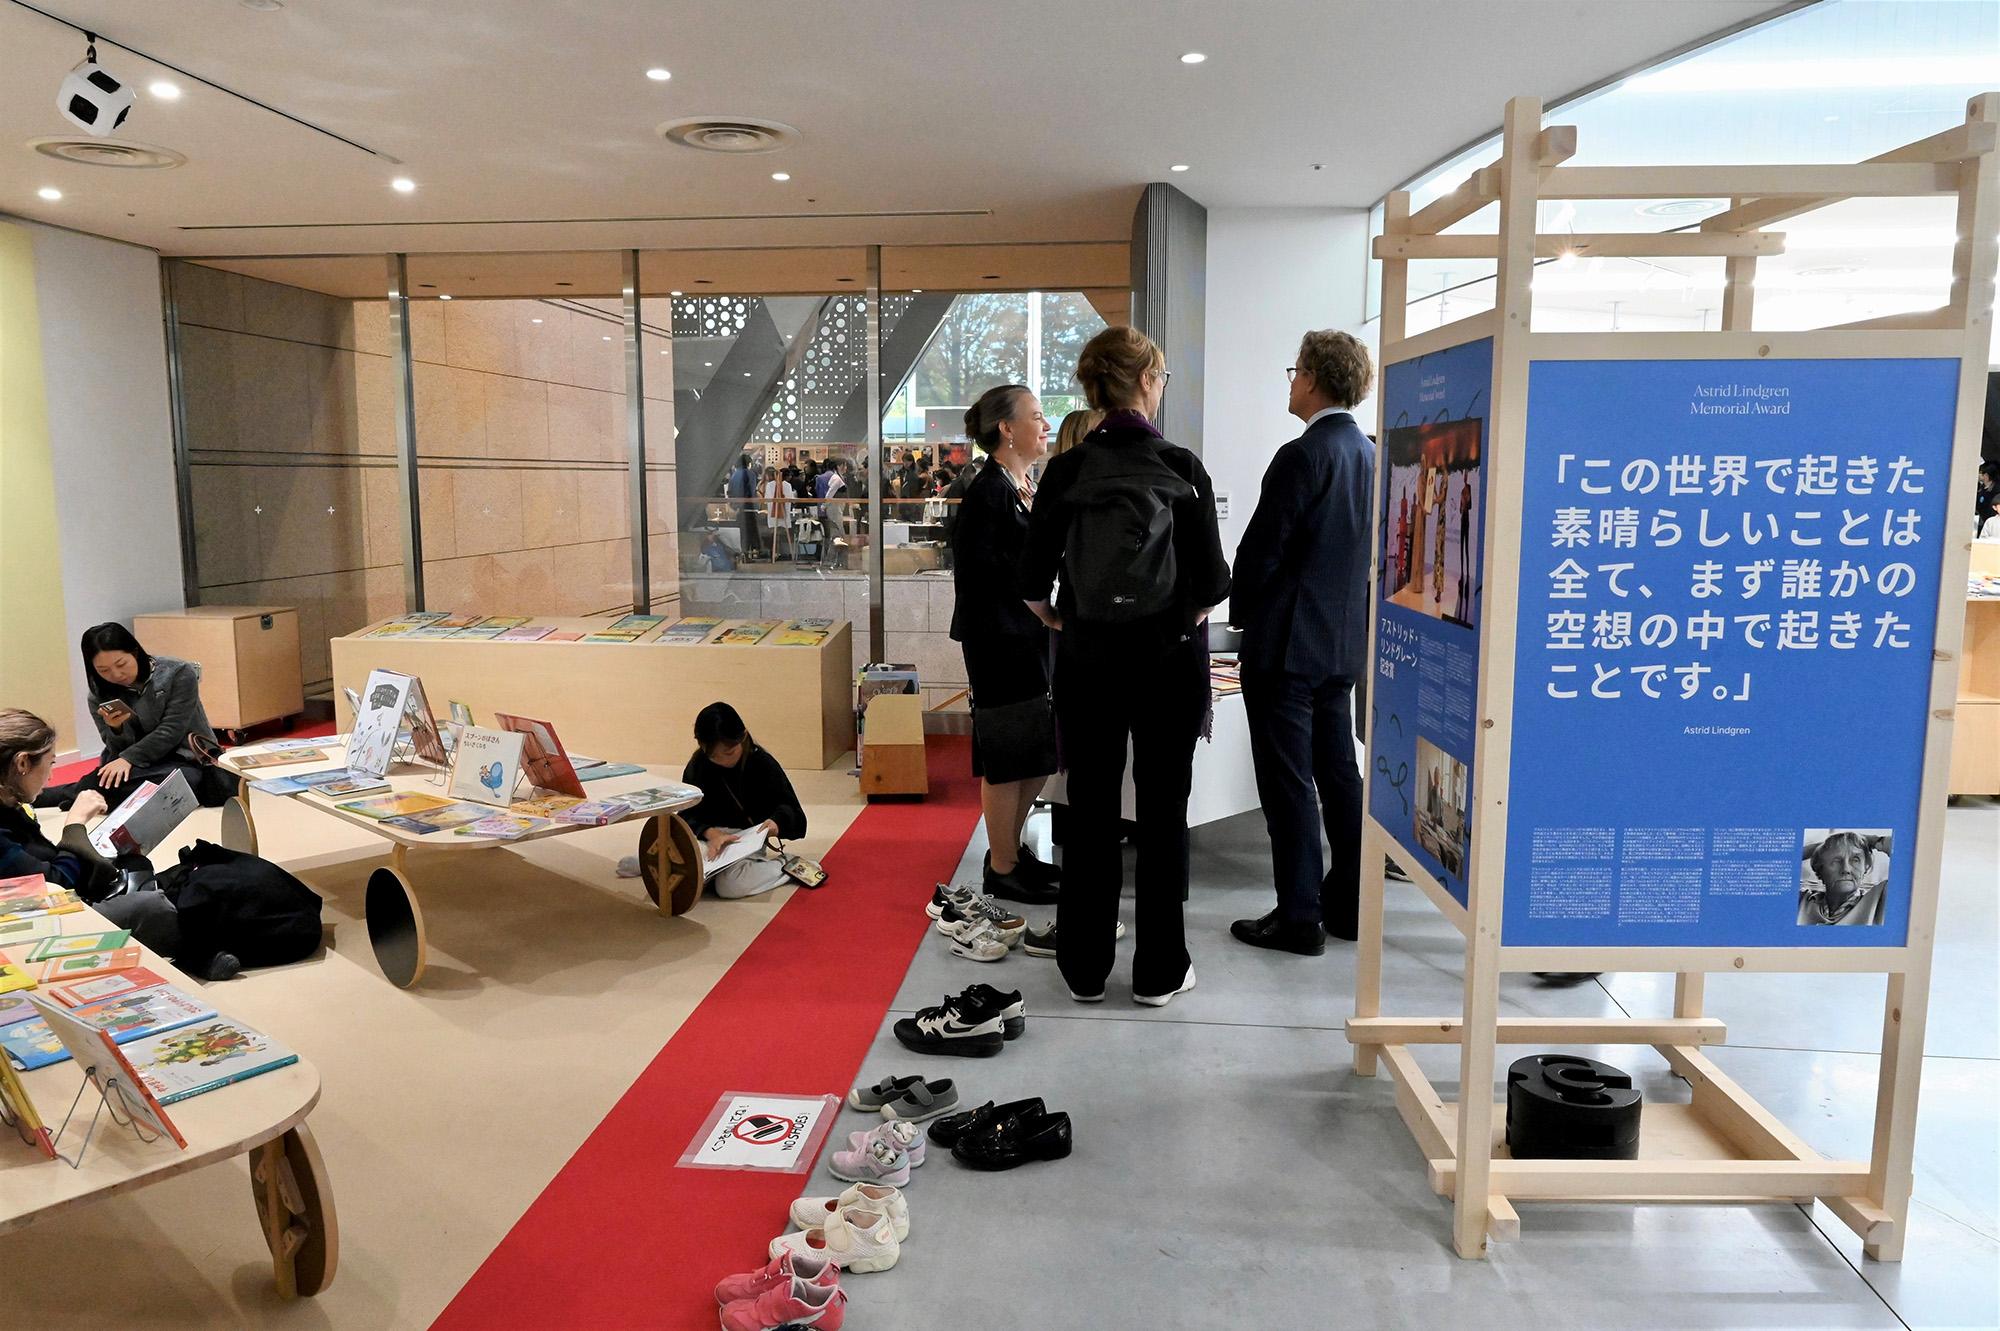 Children and adults reading books by the poster exhibition.